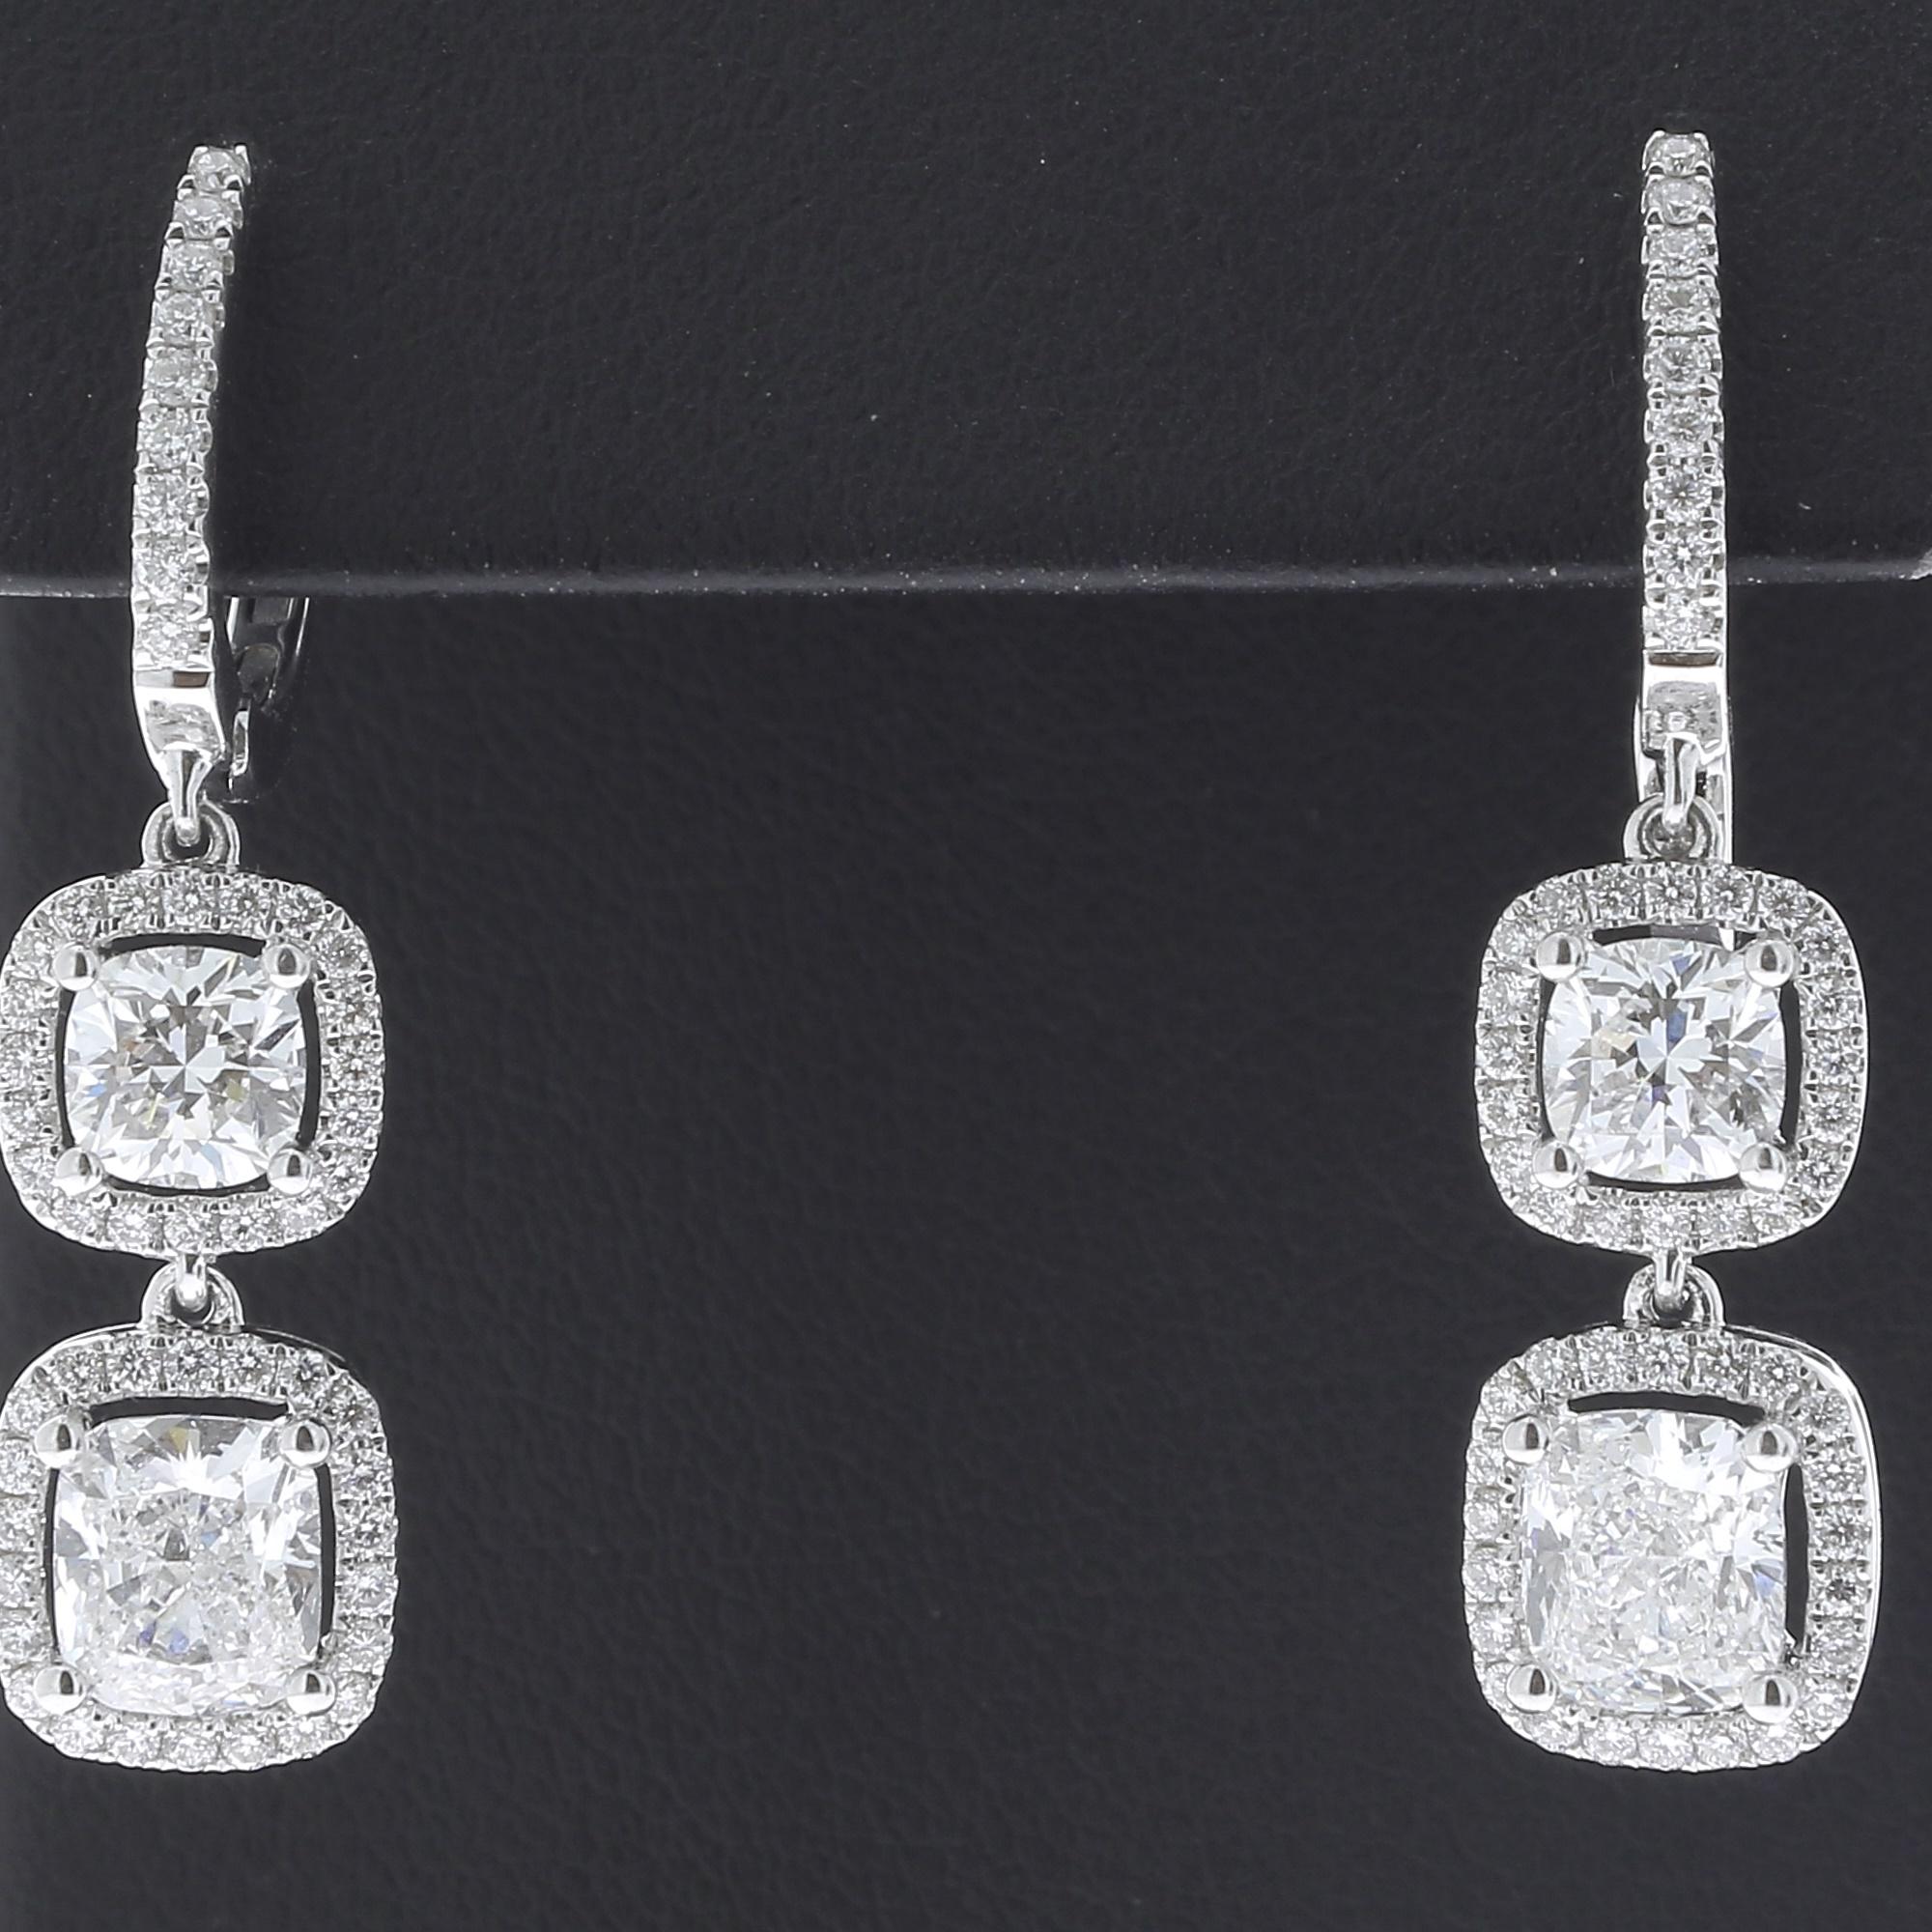 Discover our wonderful Diamond cushion earrings.
The earrings are set with 4 cushion shape diamonds weighing 3.02 Carats.
1 Cushion weighing 0.50 Carats Color Grade F Clarity Grade VS2 
(GIA REPORT 2165702180)
1 Cushion weighing 0.50 Carats Color